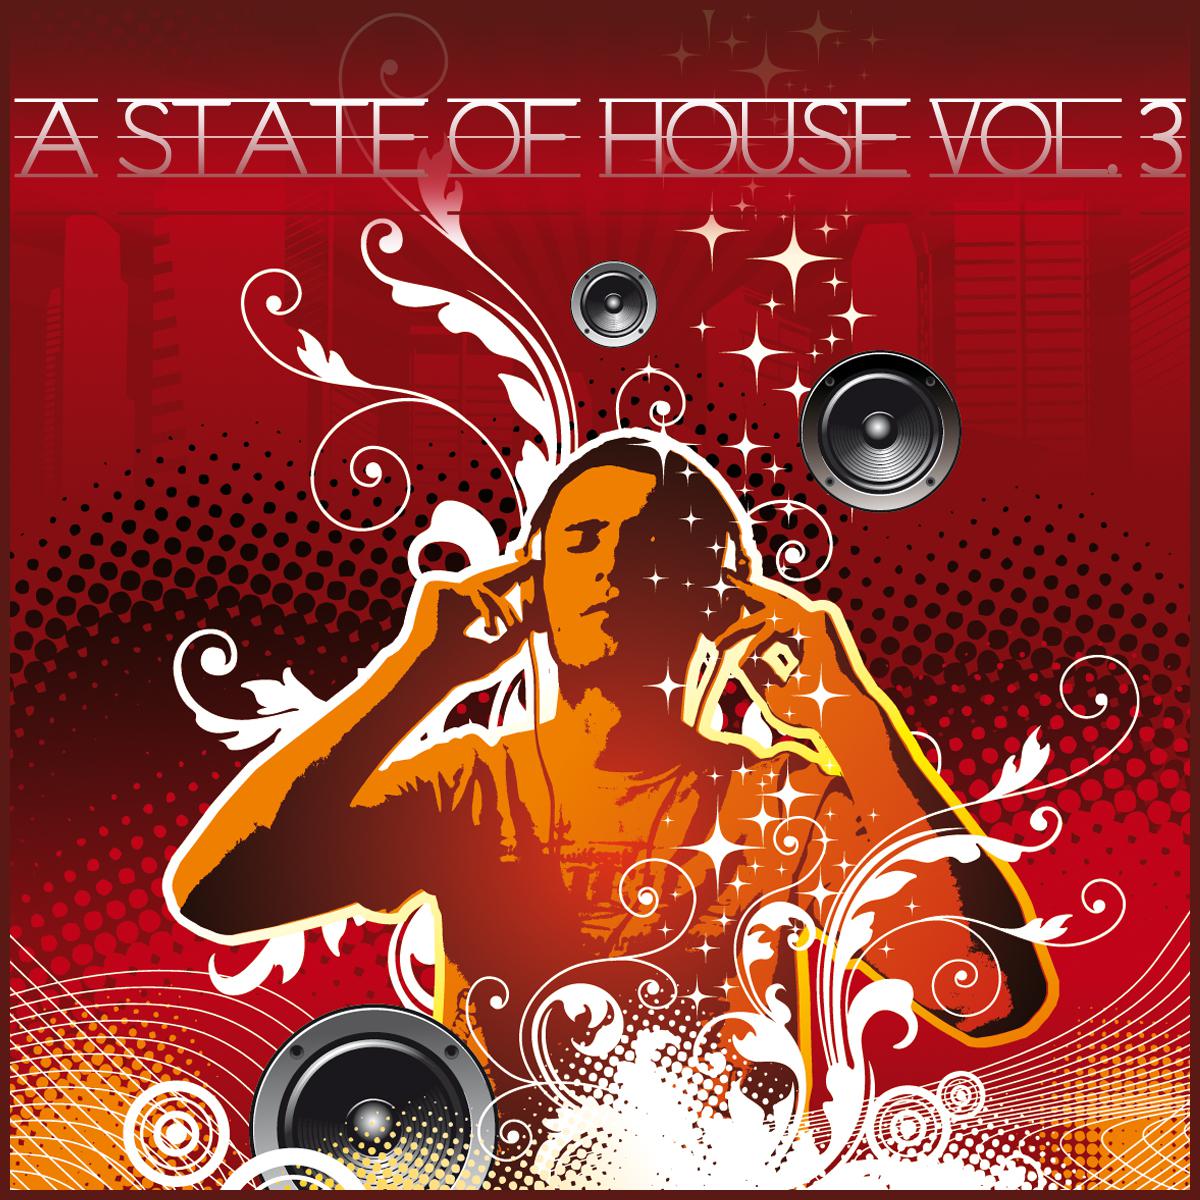 A State of House, Vol. 3